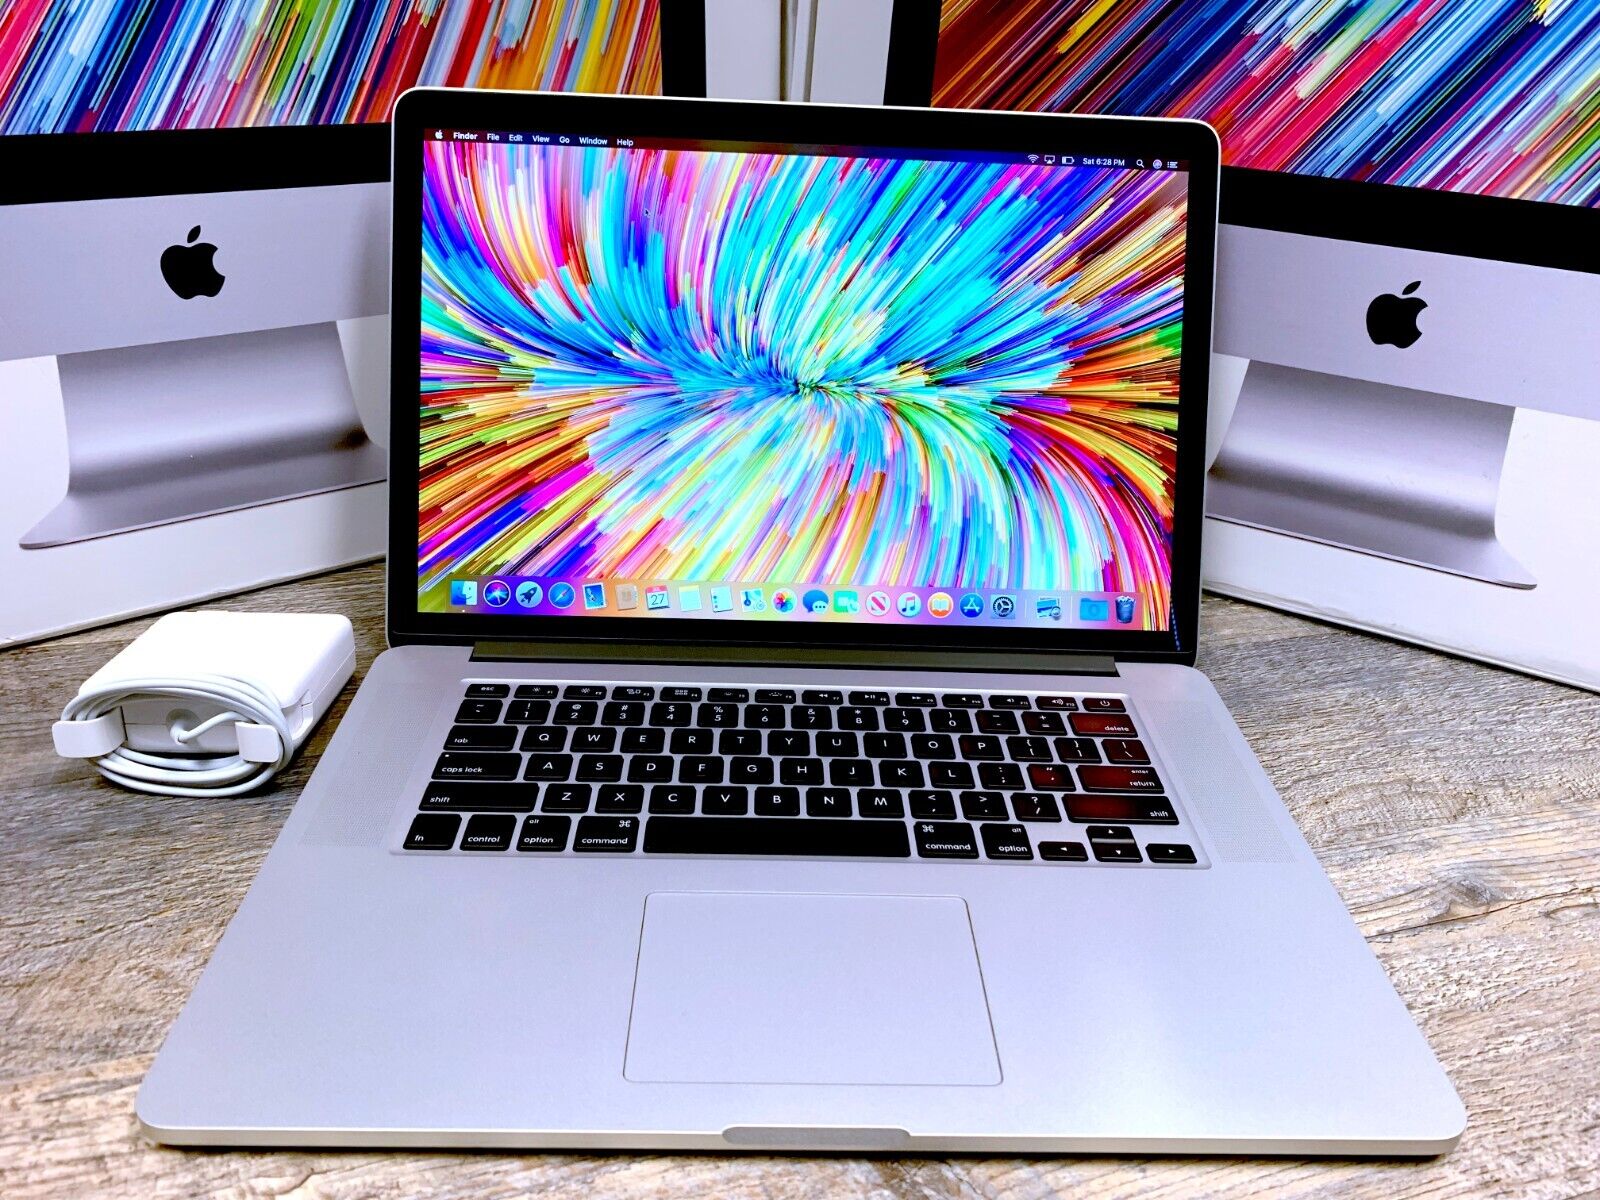 APPLE MACBOOK PRO 15 | *HUGE 1TB SSD* 16GB QUAD CORE i7 4.0GHZ | RETINA. Available Now for $499.00